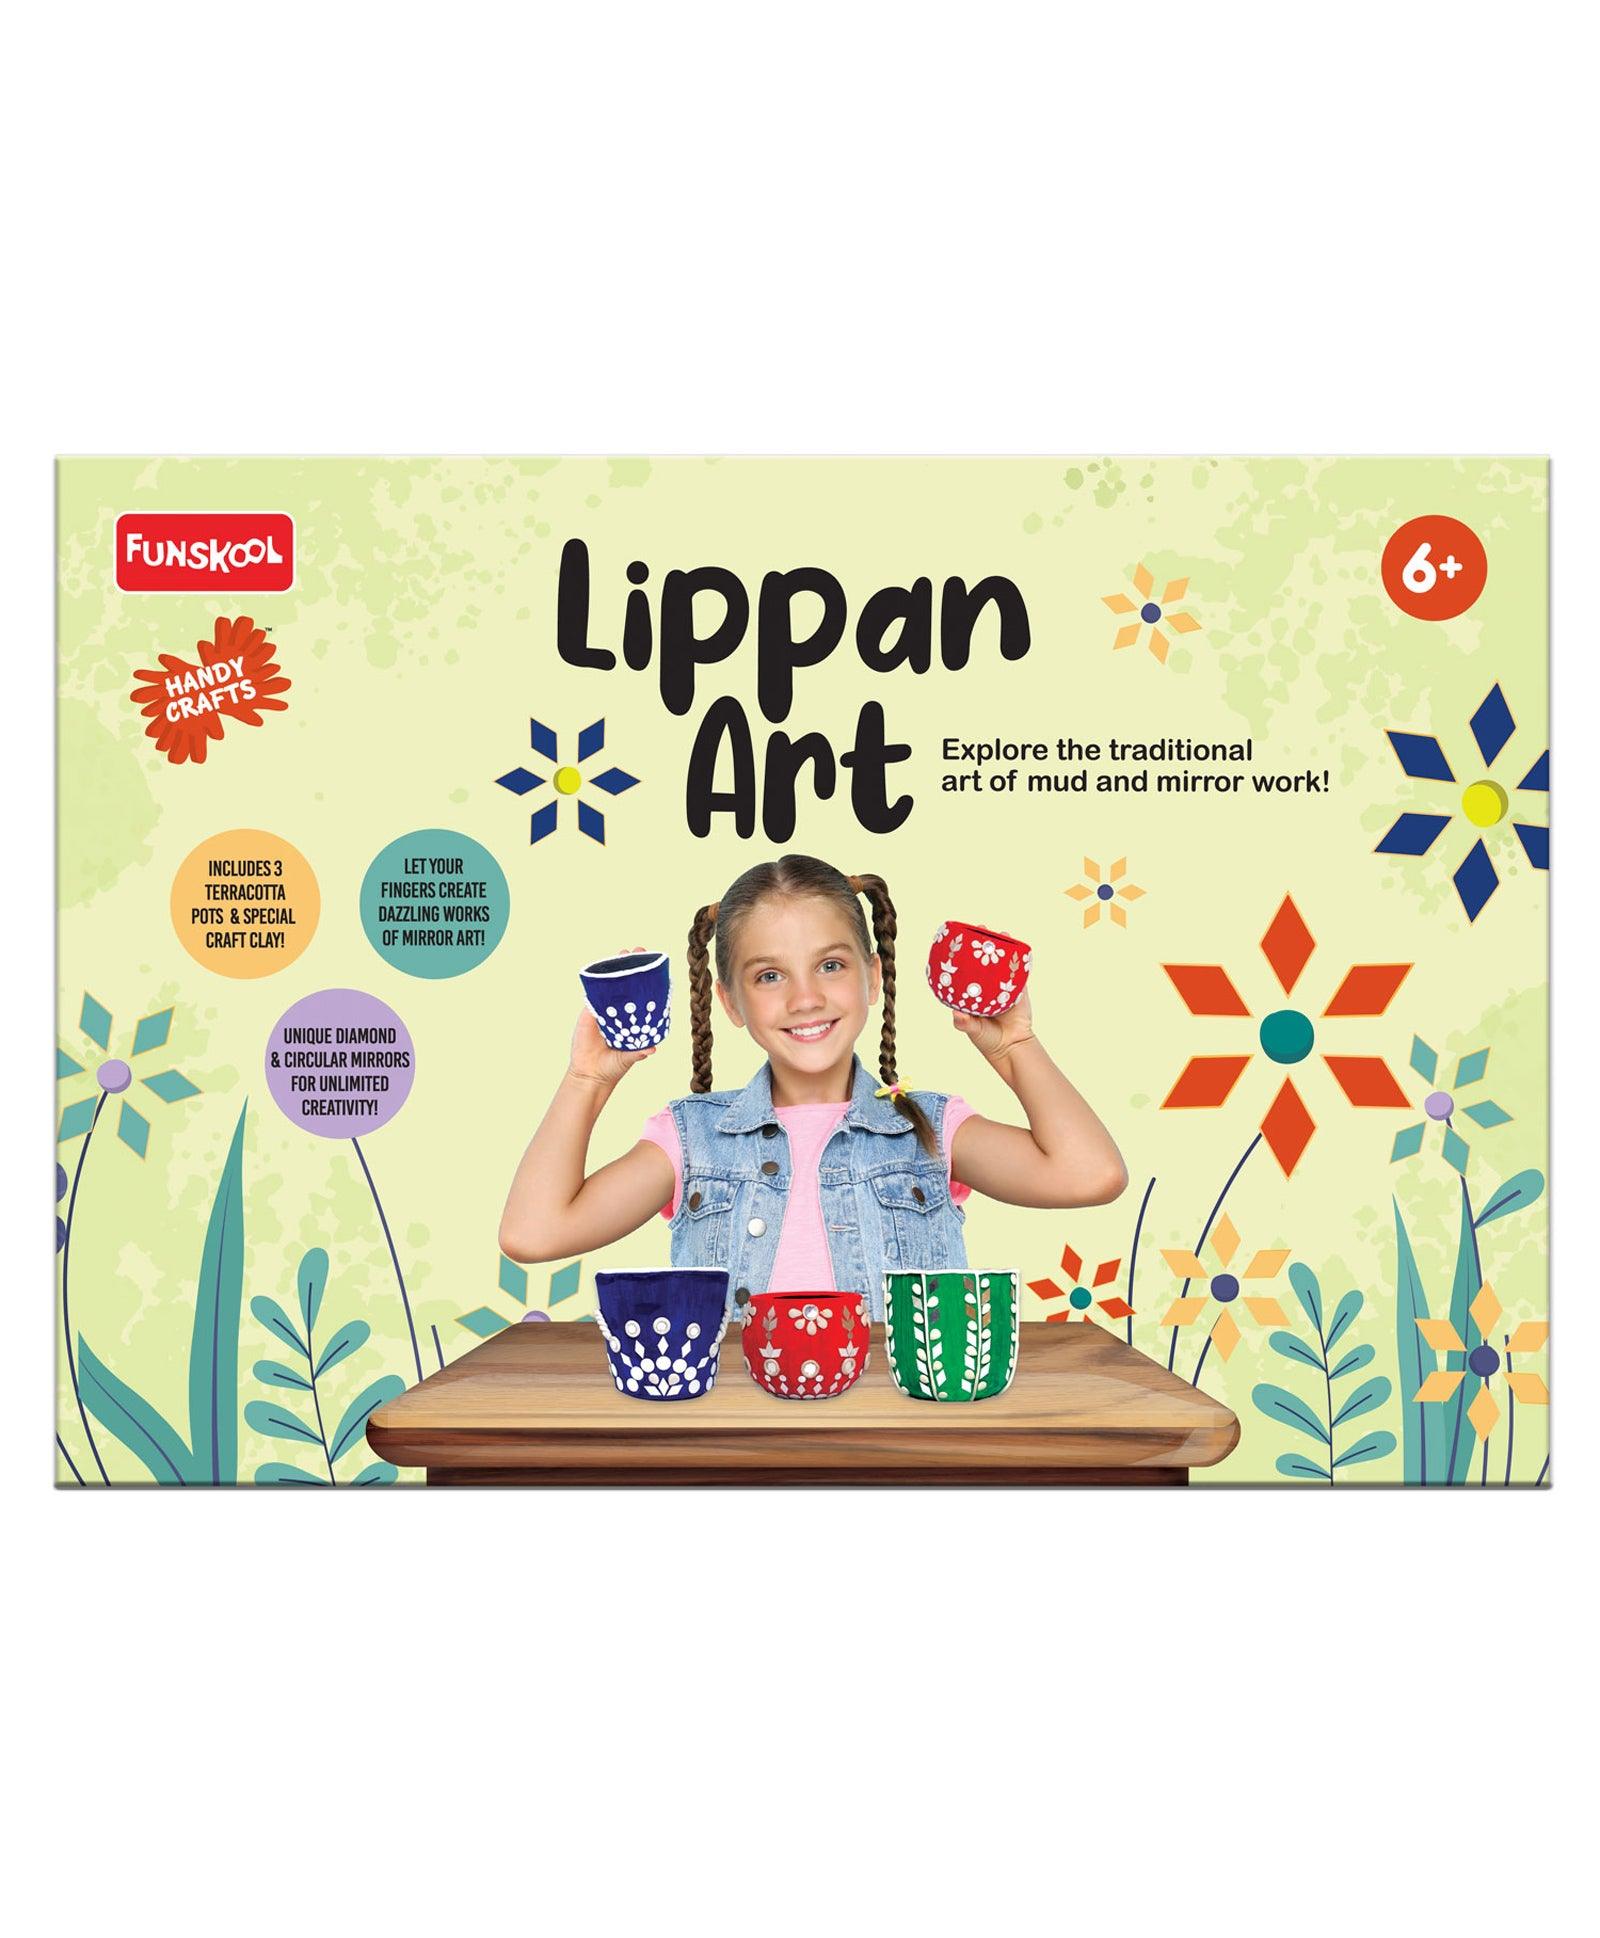 Funskool Handycrafts Mirror and Lippan Art Pot Decorating kit for Ages 6+